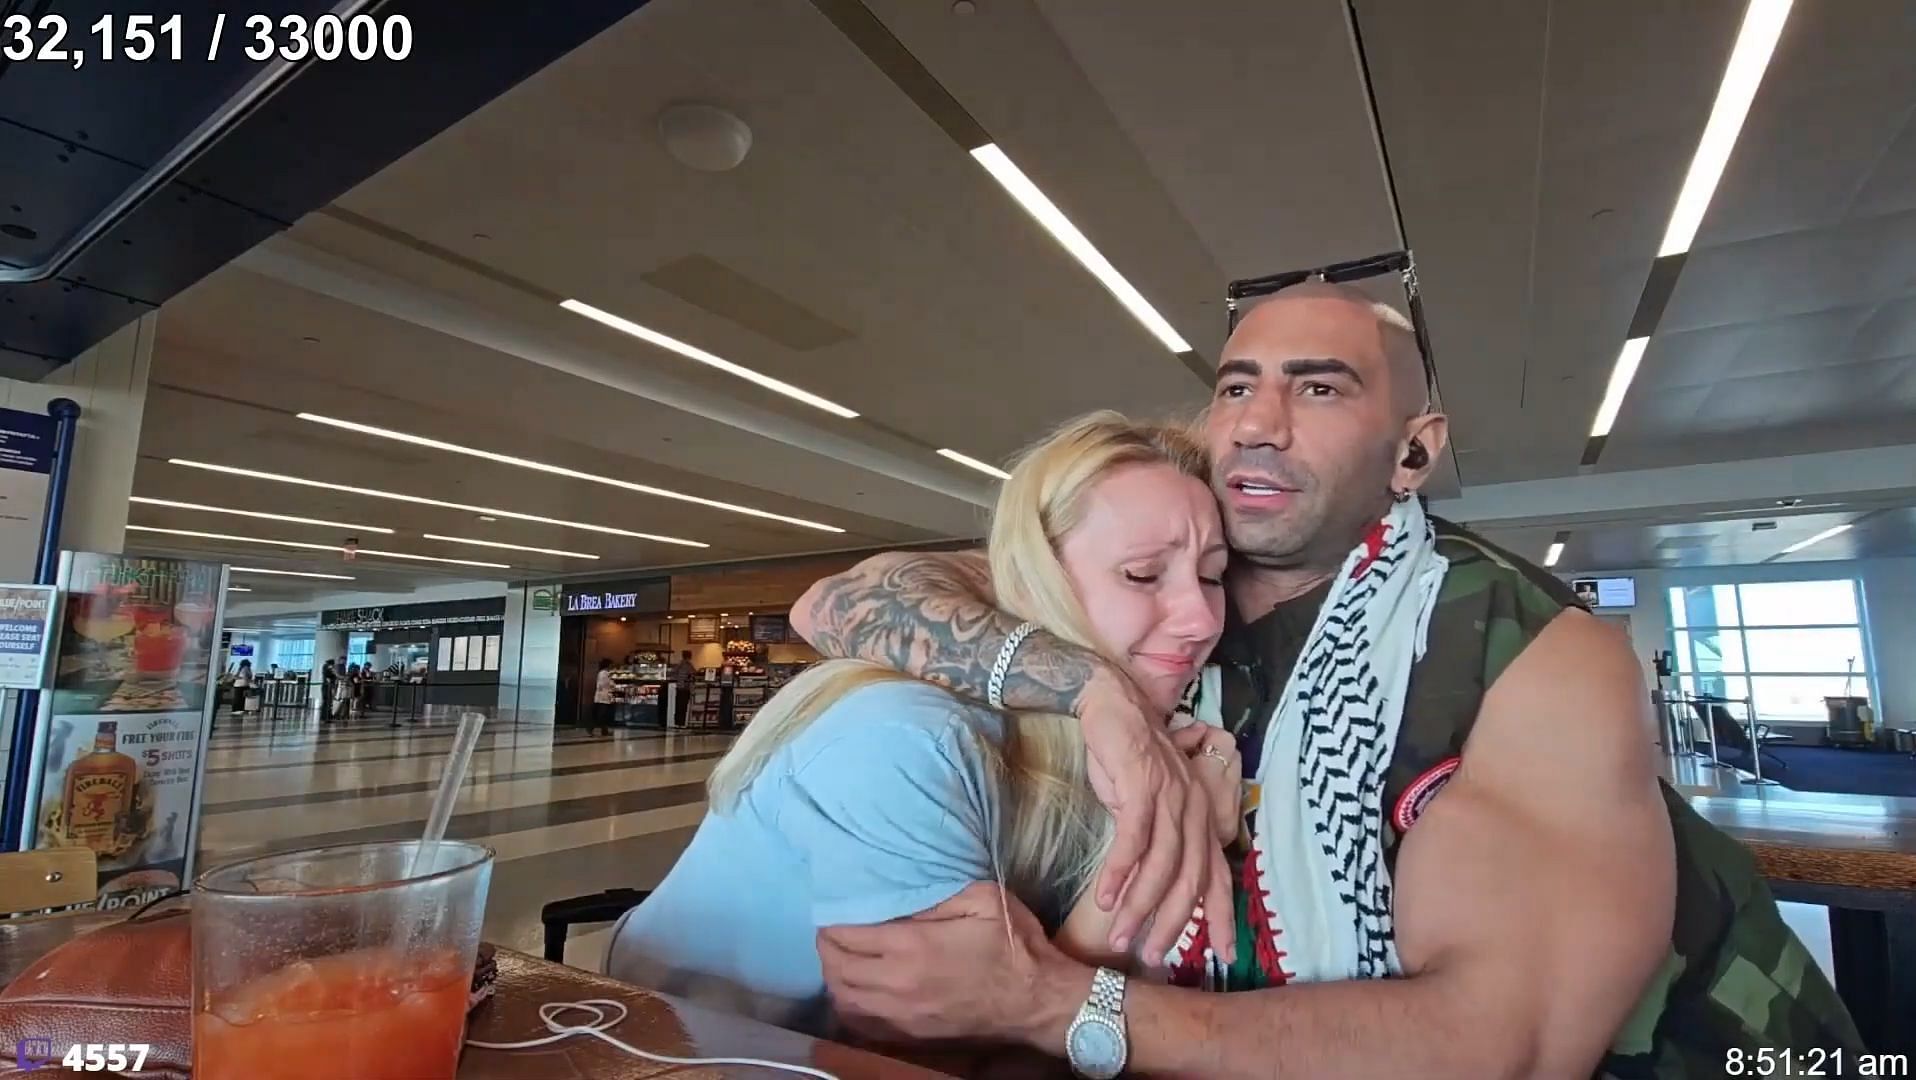 Twitch streamer and YouTuber Fousey accused of taking advantage of drunk woman pic